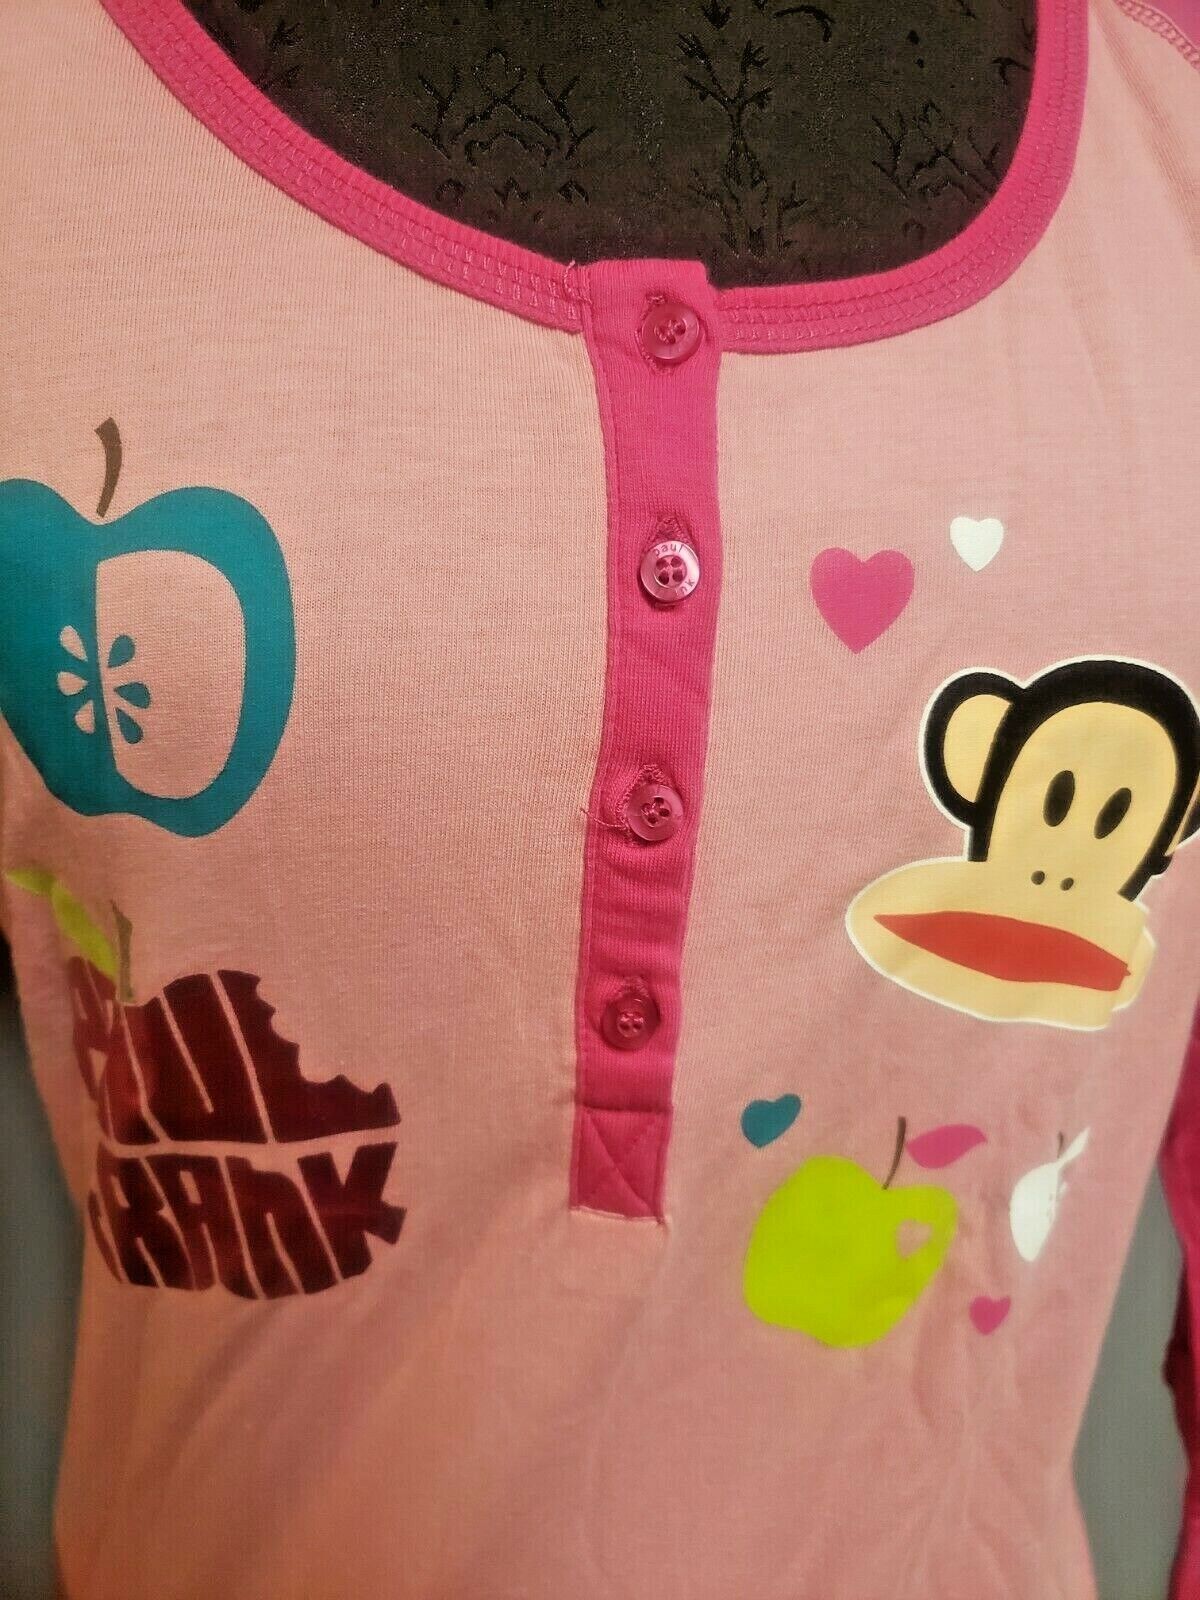 Primary image for Paul Frank Ladies Pink Night Shirt Pajamas Top L Monkey NEW w/ Tag FREE Shipping